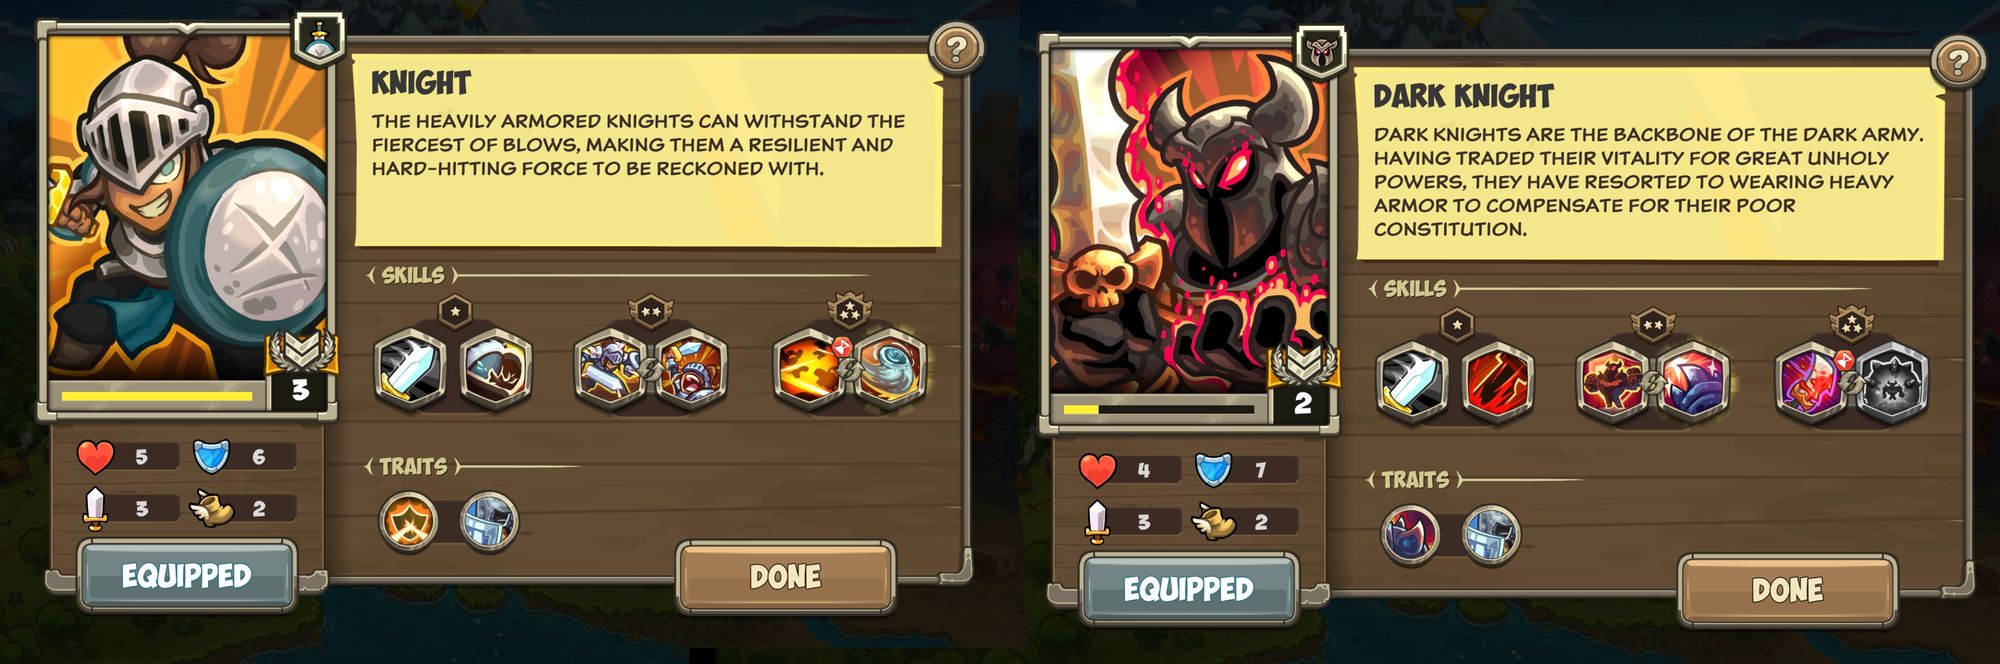 Screenshot from the game of Knight's and Dark Knight's stat cards.